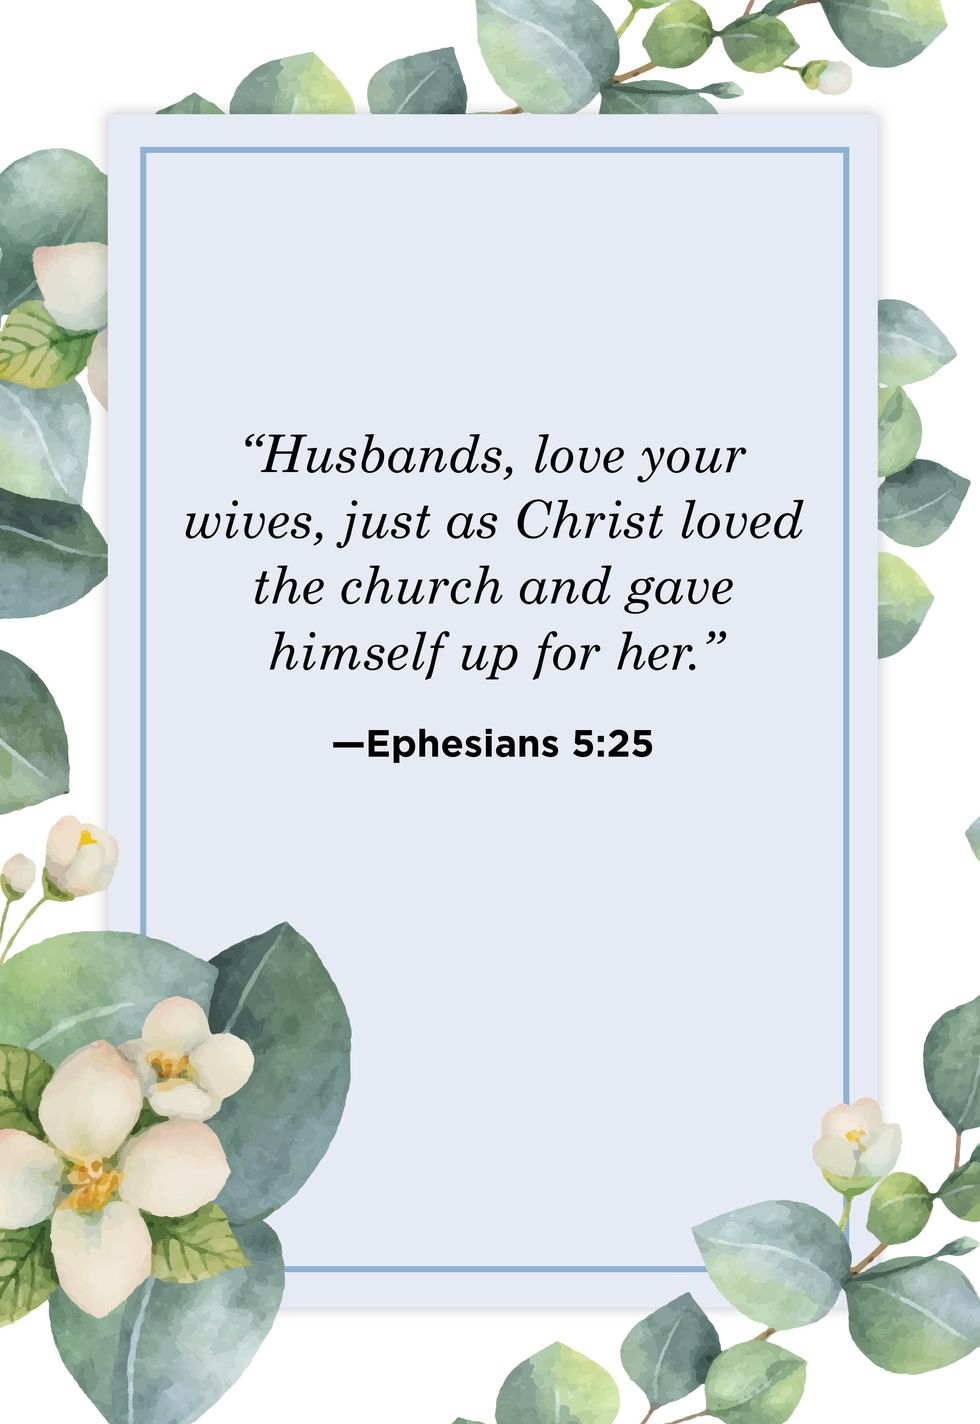 25 Bible Verses That Are Perfect For Your Wedding Day